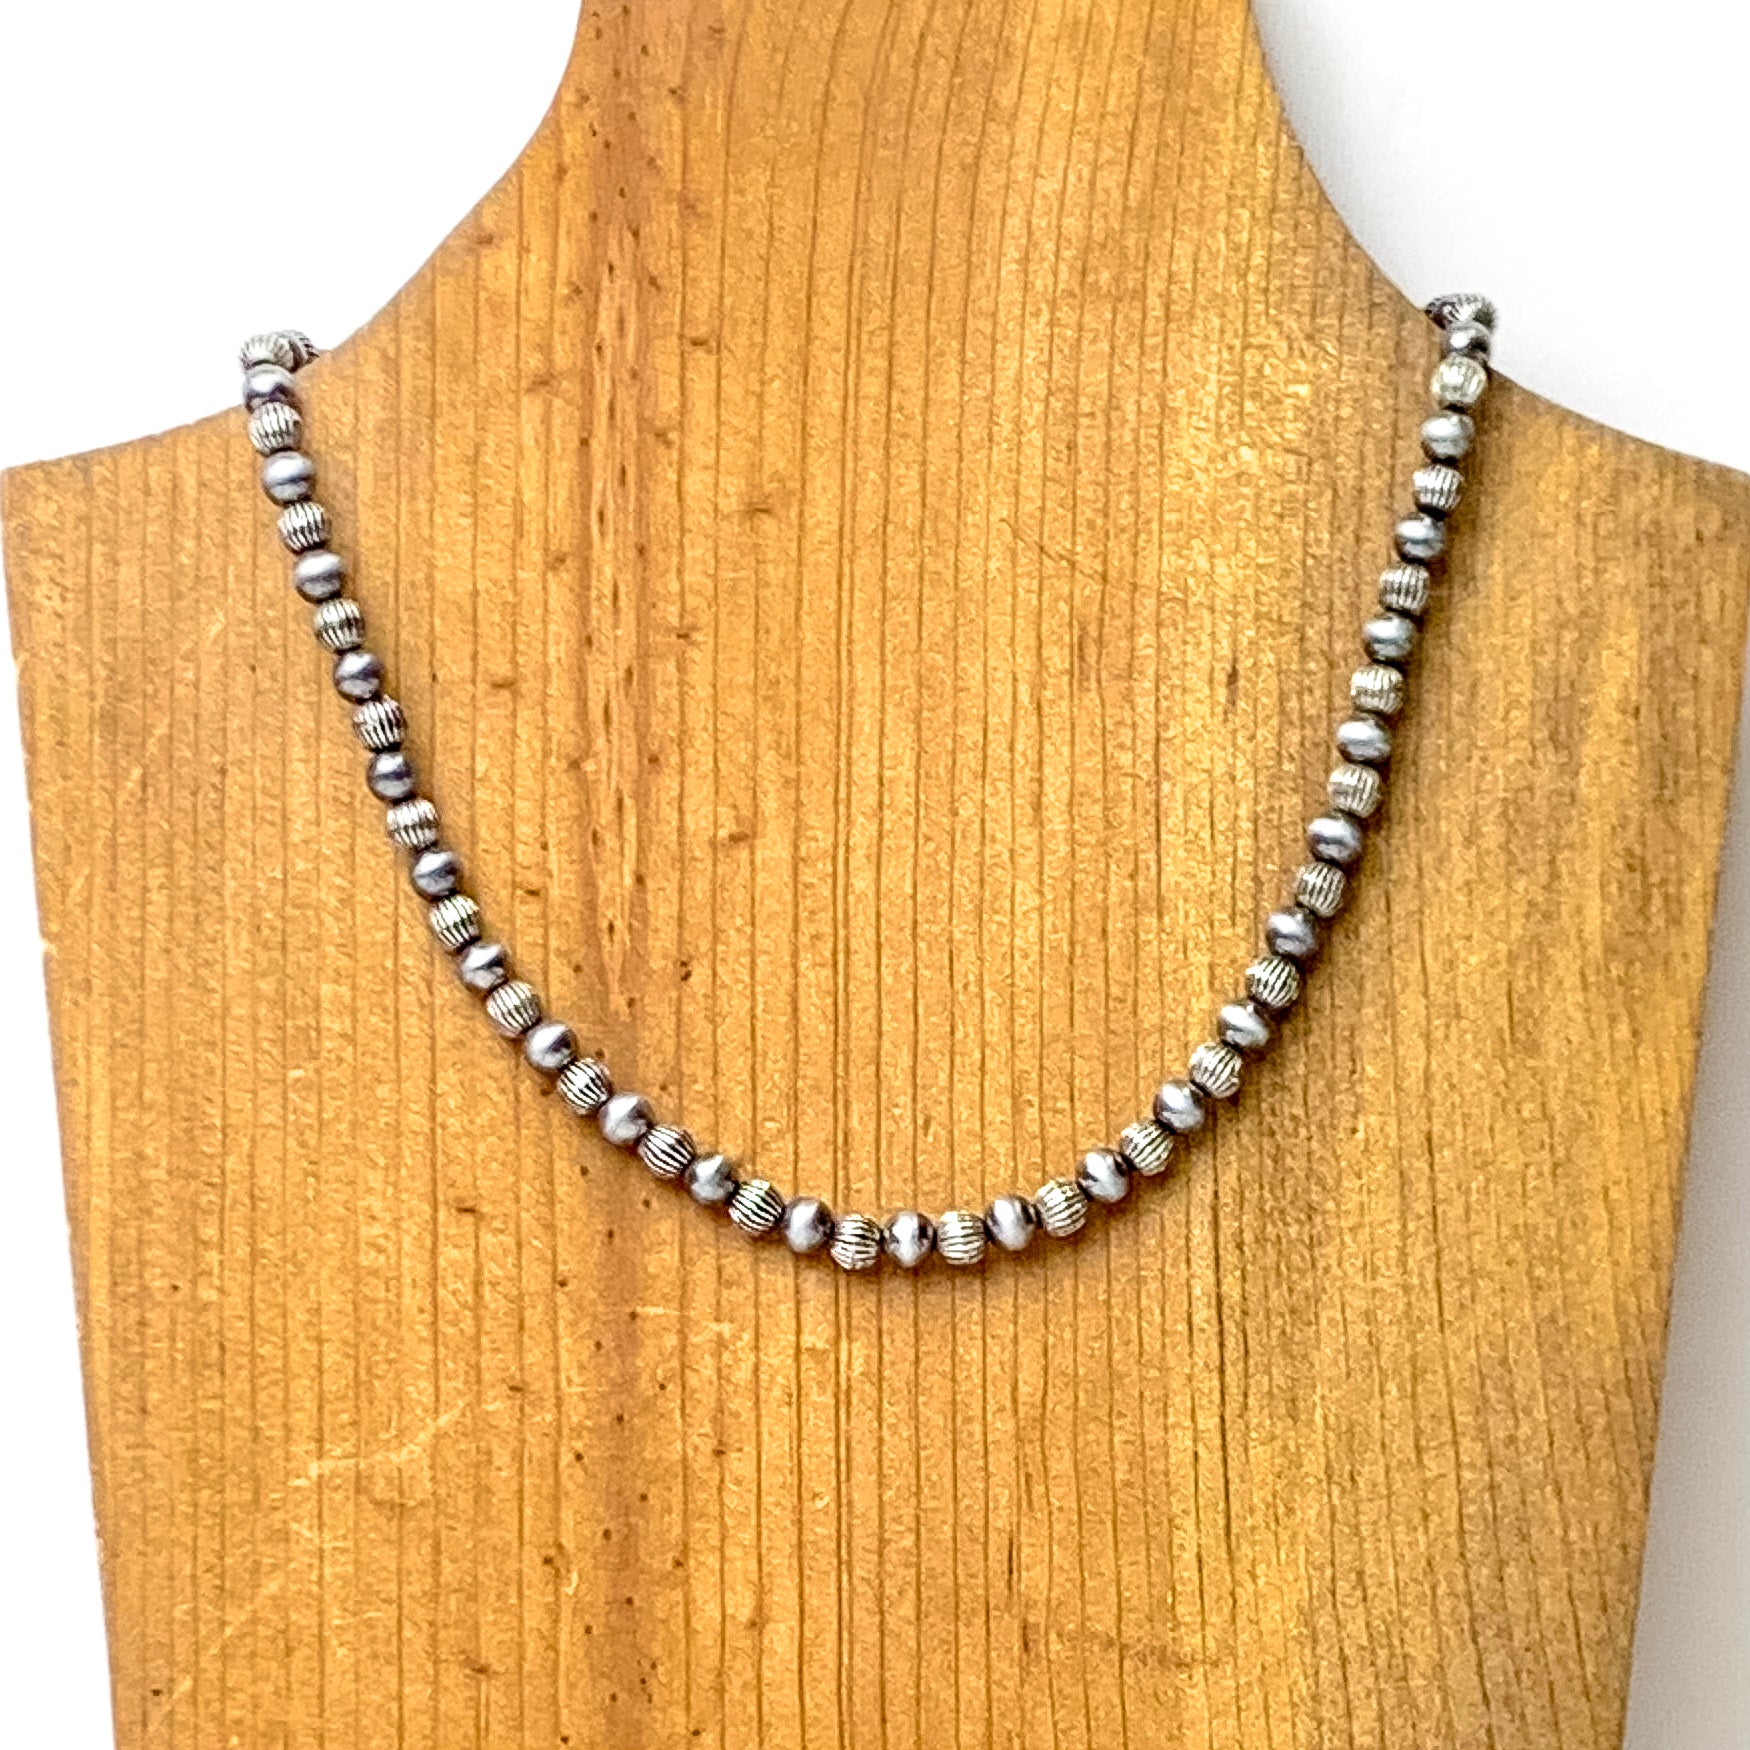 Faux Navajo Pearl Necklace with Corrugated Spacers in Silver Tone - Giddy Up Glamour Boutique